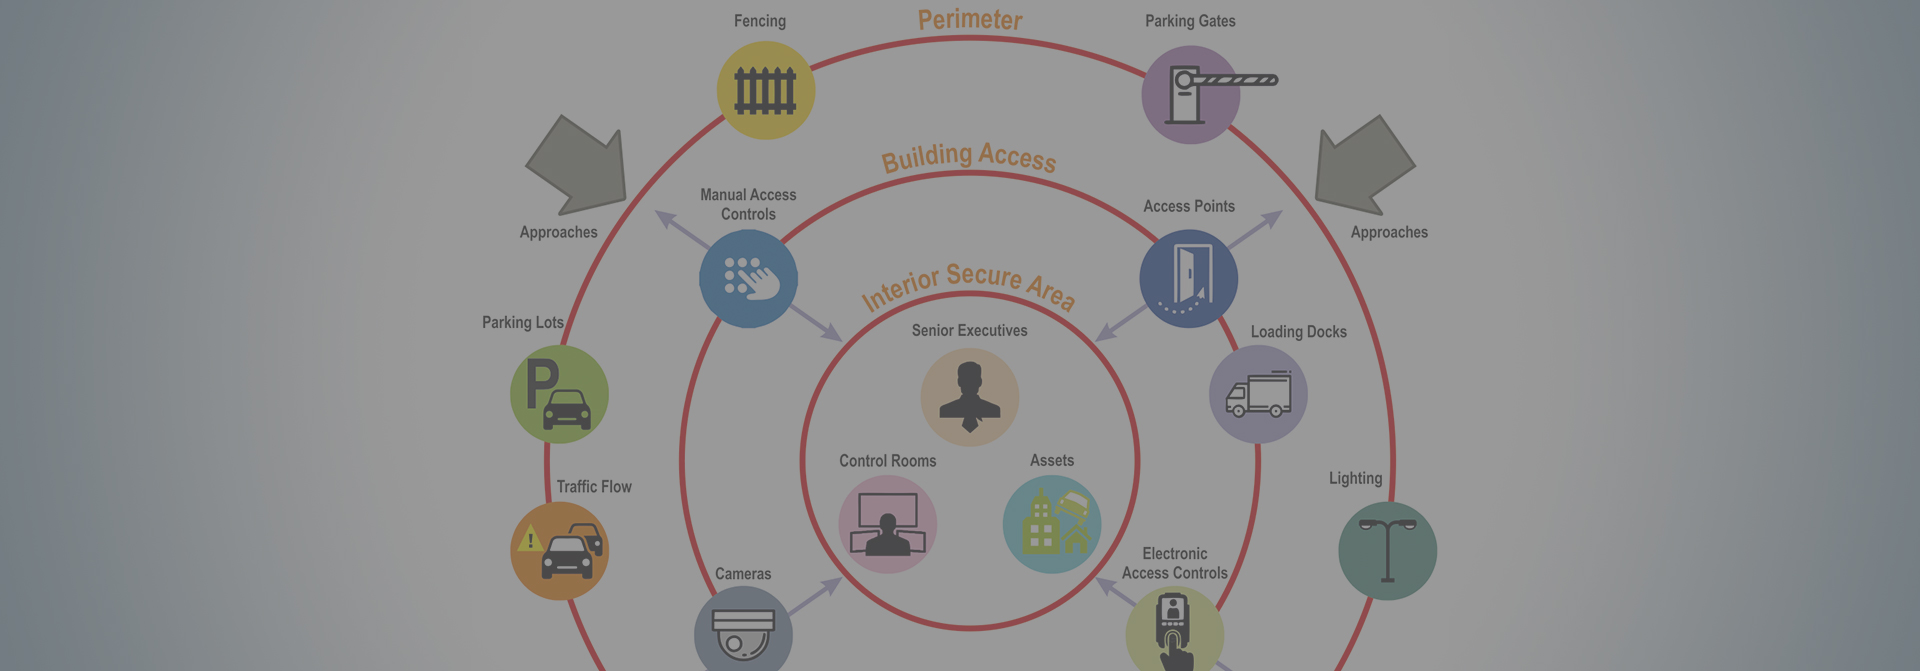 Physical Security Audits and Assessment – Issues and Concerns that it can uncover